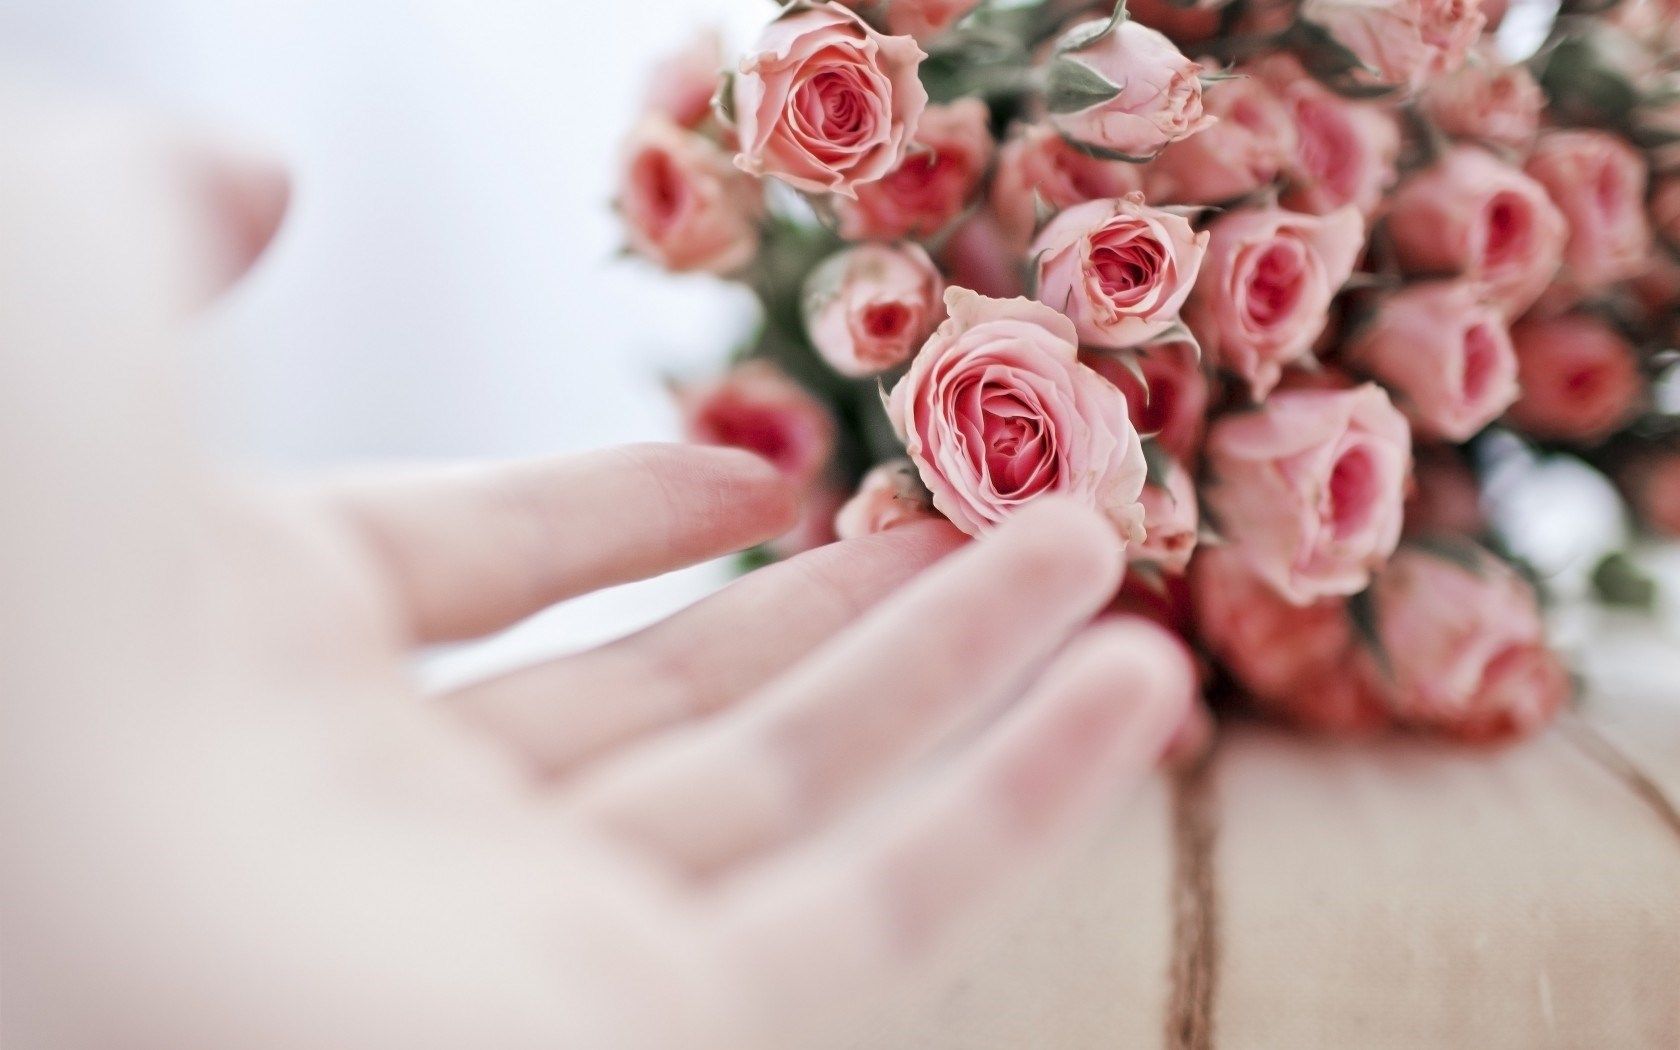 Roses Flowers Pink Hand Girl